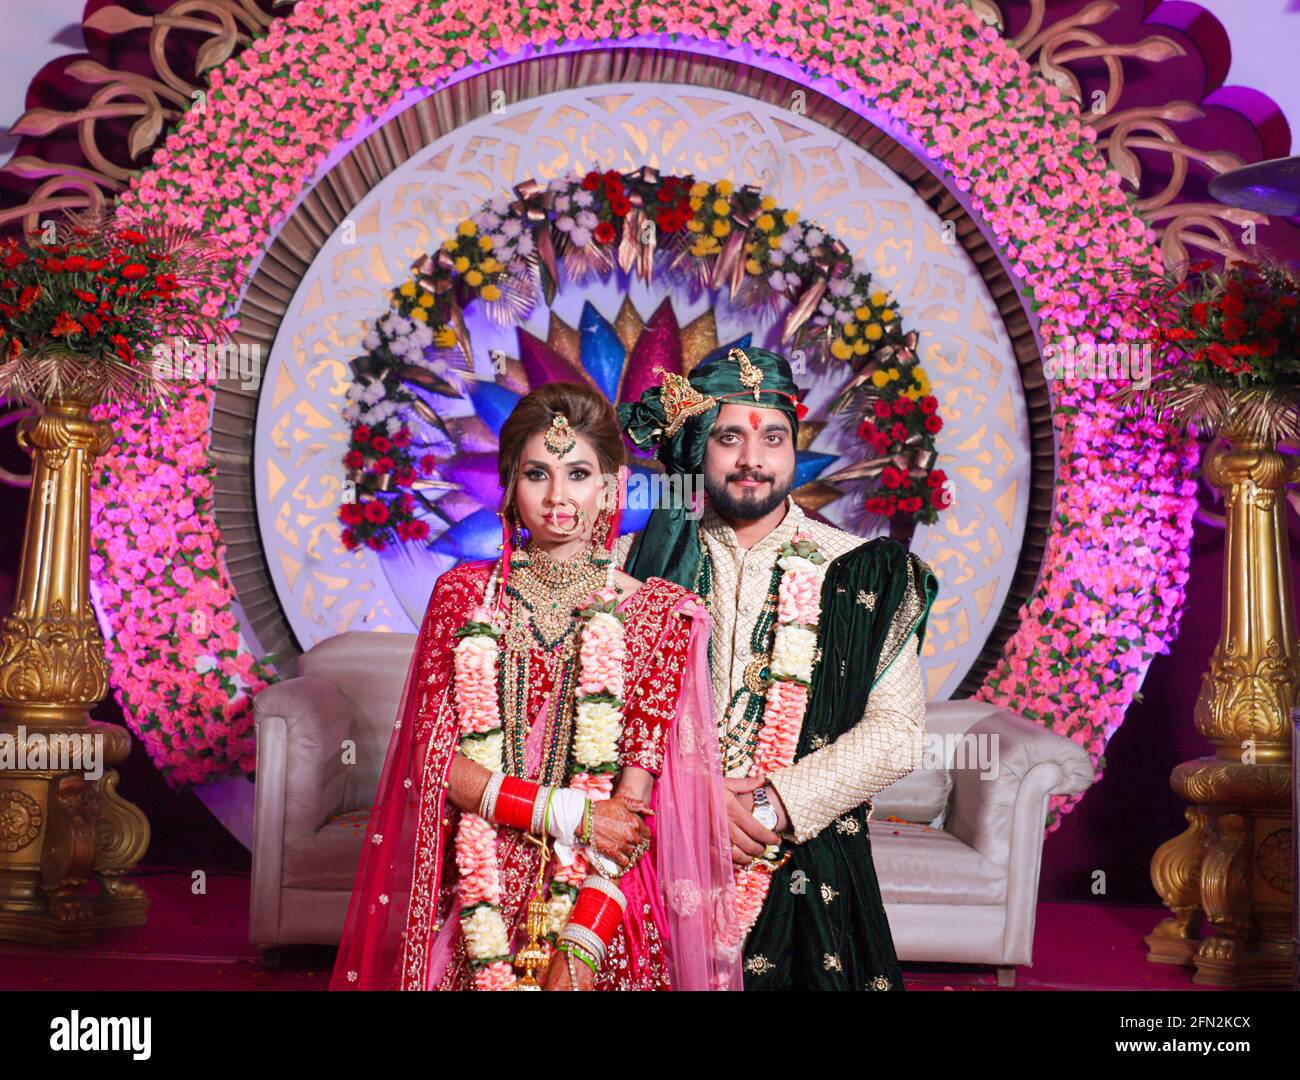 gorgeous stunning indian bride and groom wearing traditionally dress are posing on their wedding ceremony 2FN2KCX